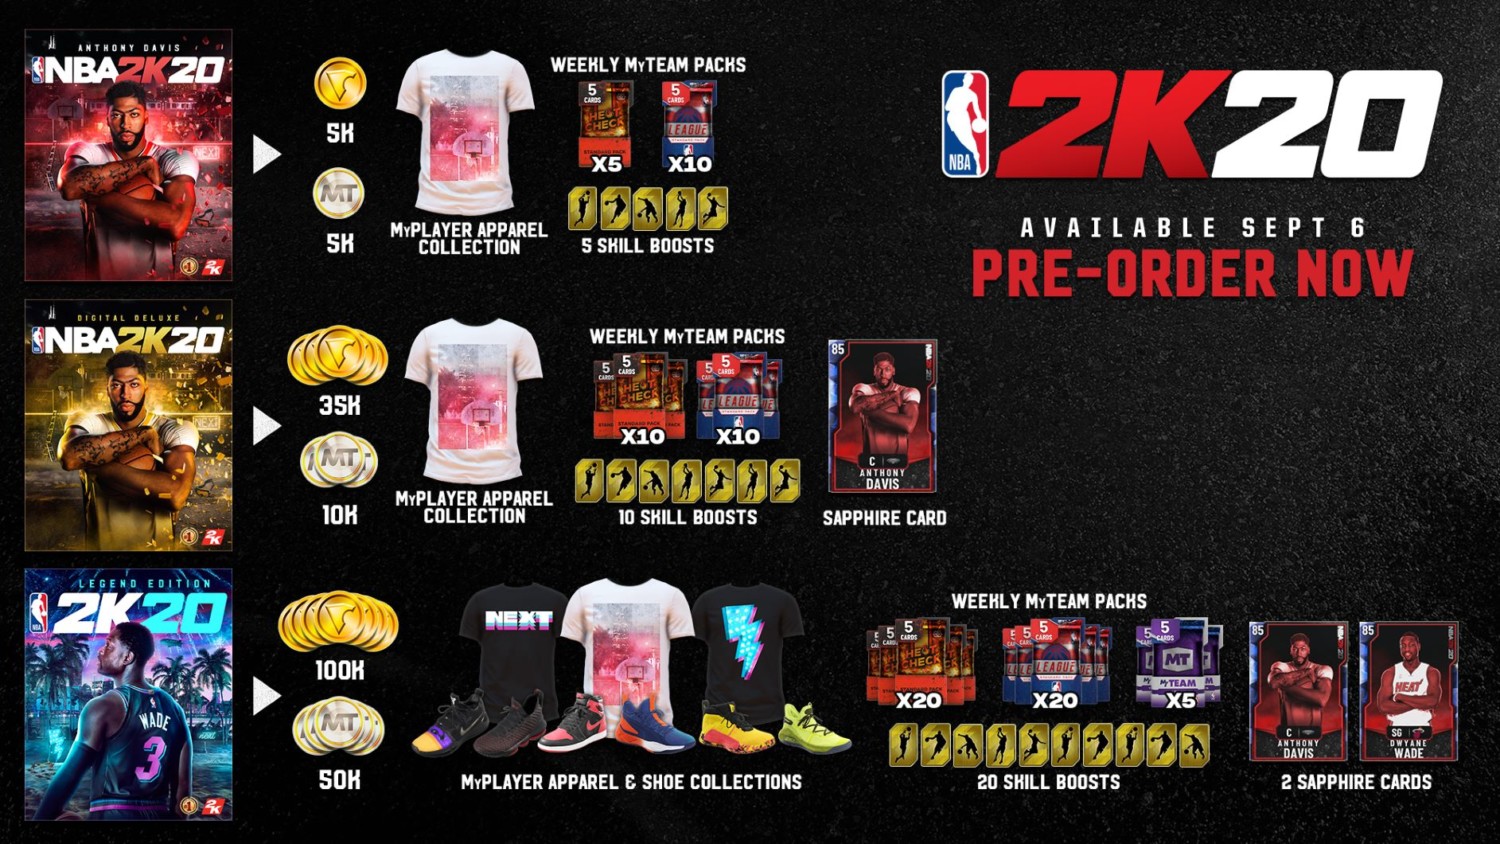 Anthony Davis and Dwyane Wade are the Cover Stars for NBA® 2K20 -